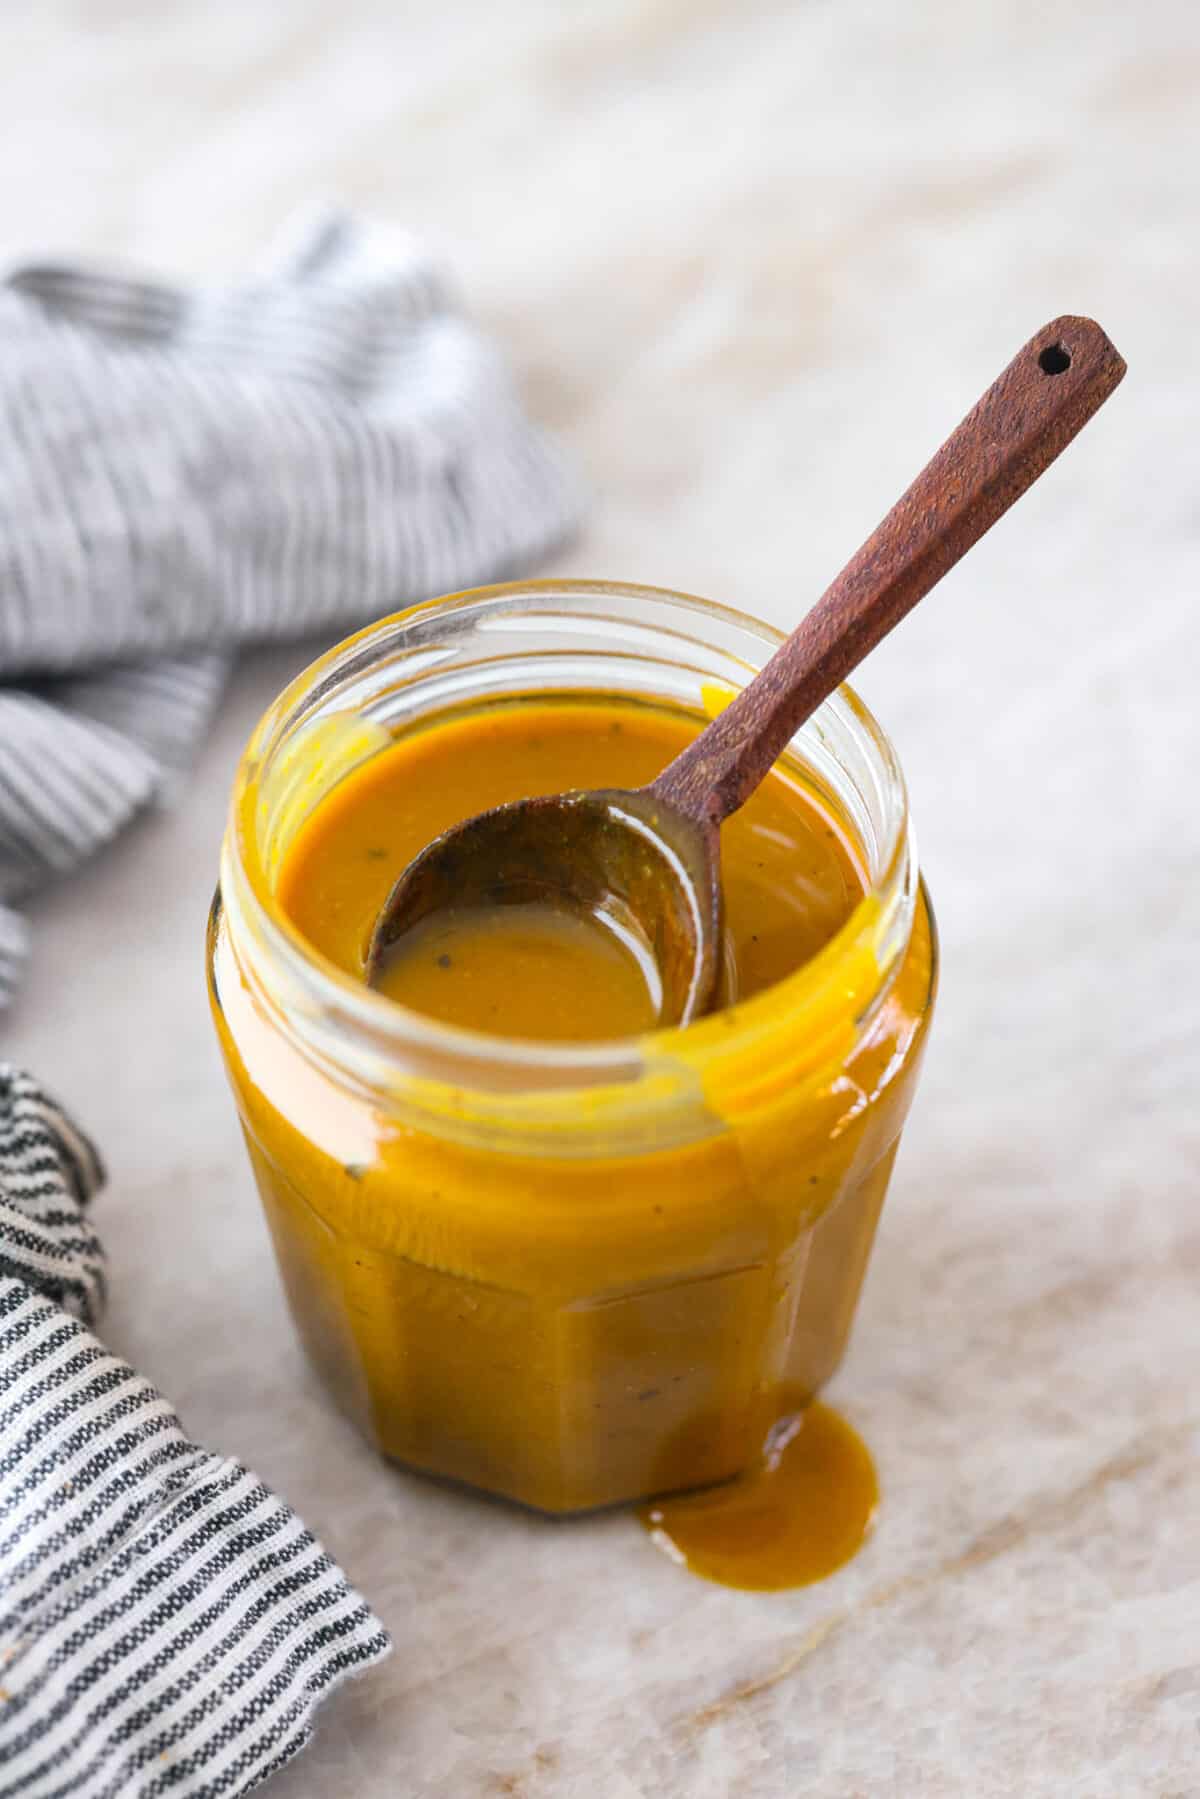 A glass jar filled with mustard bbq sauce. There is a wooden spoon in the jar as well.